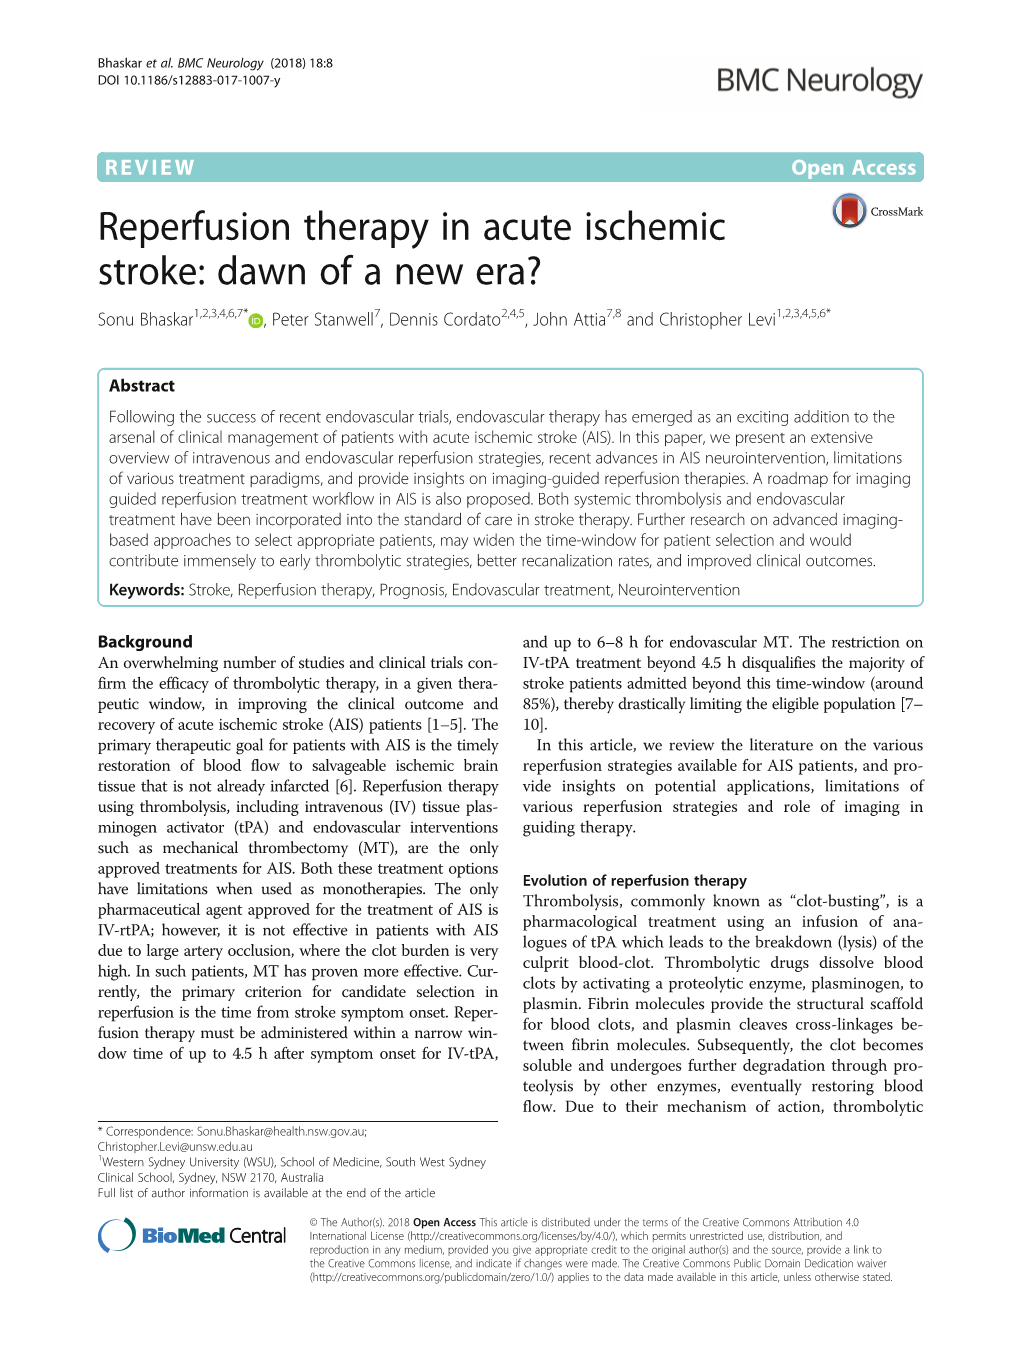 Reperfusion Therapy in Acute Ischemic Stroke